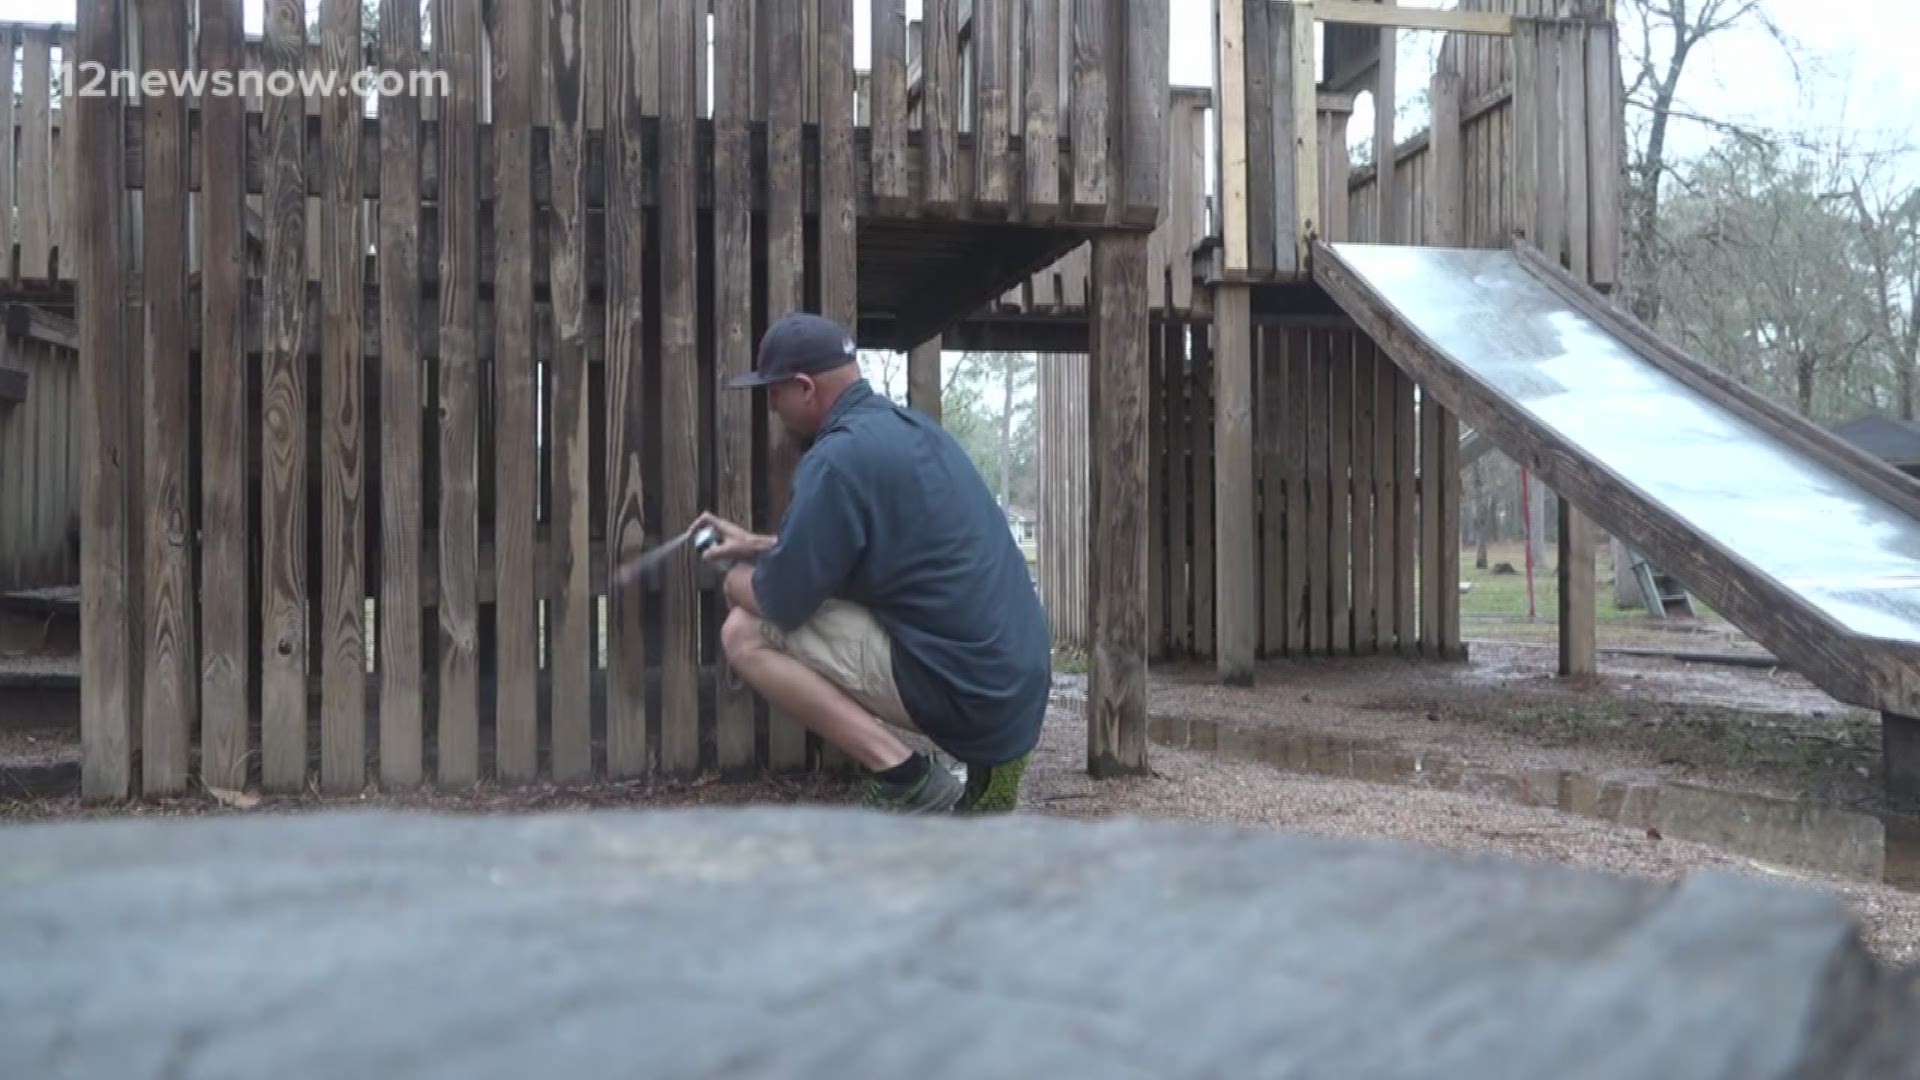 After a Silsbee park was vandalized, the owner of Modica Brothers stepped up to clean